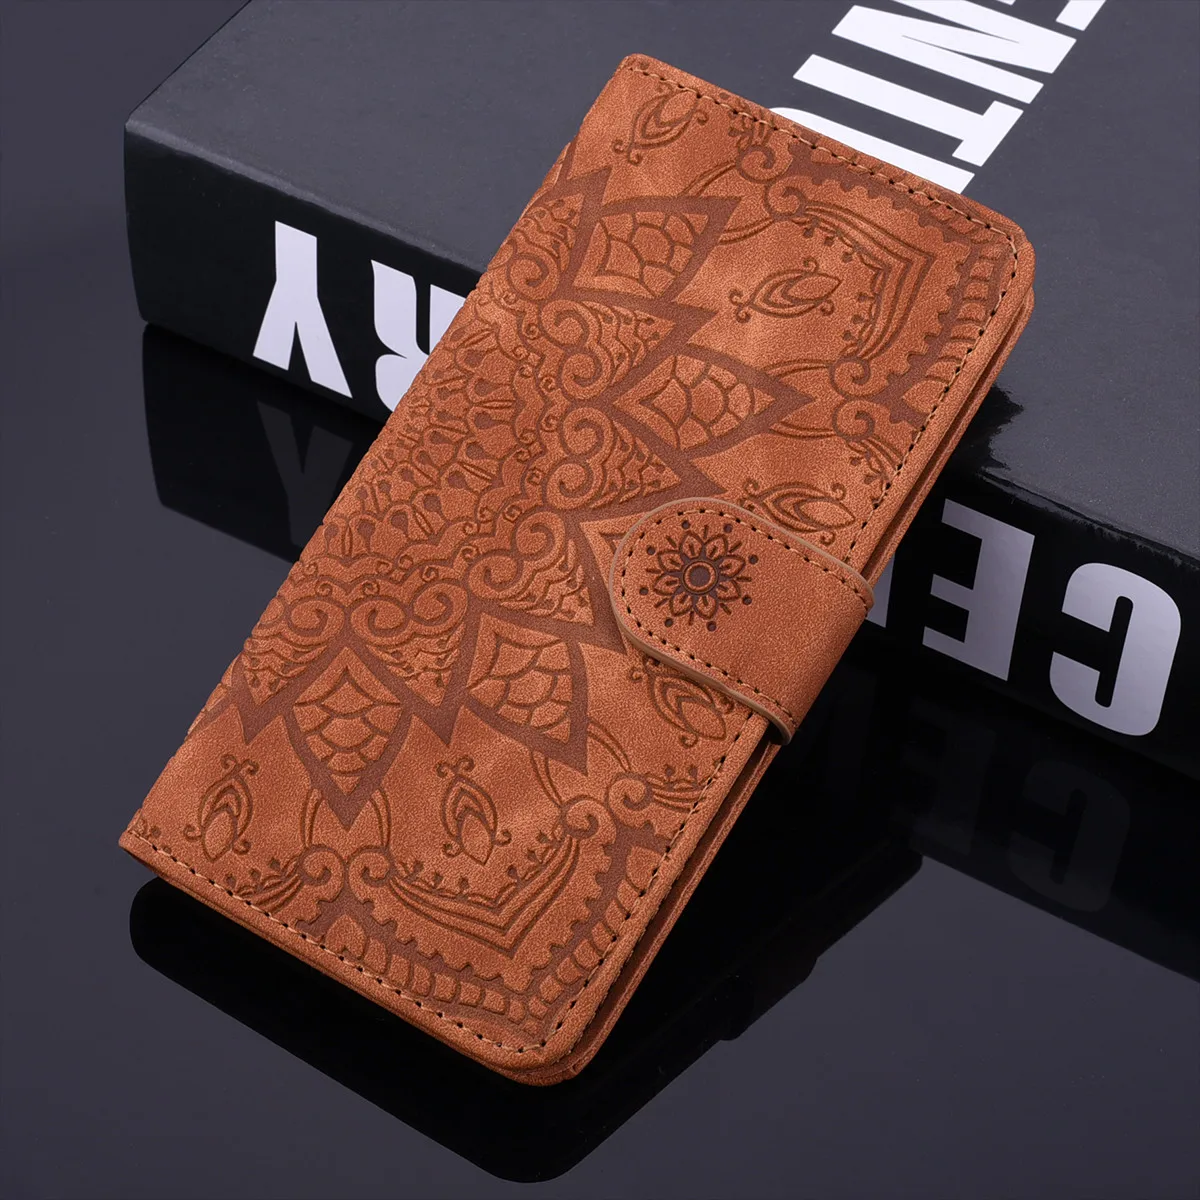 

Leather Wallet Phone Cases For Samsung Galaxy J3 J5 J7 2017 S8 S9 S10E Plus A10 A20 A30 A40 A50 A6 A8 J4 J6 2018 Flip Bags Cover